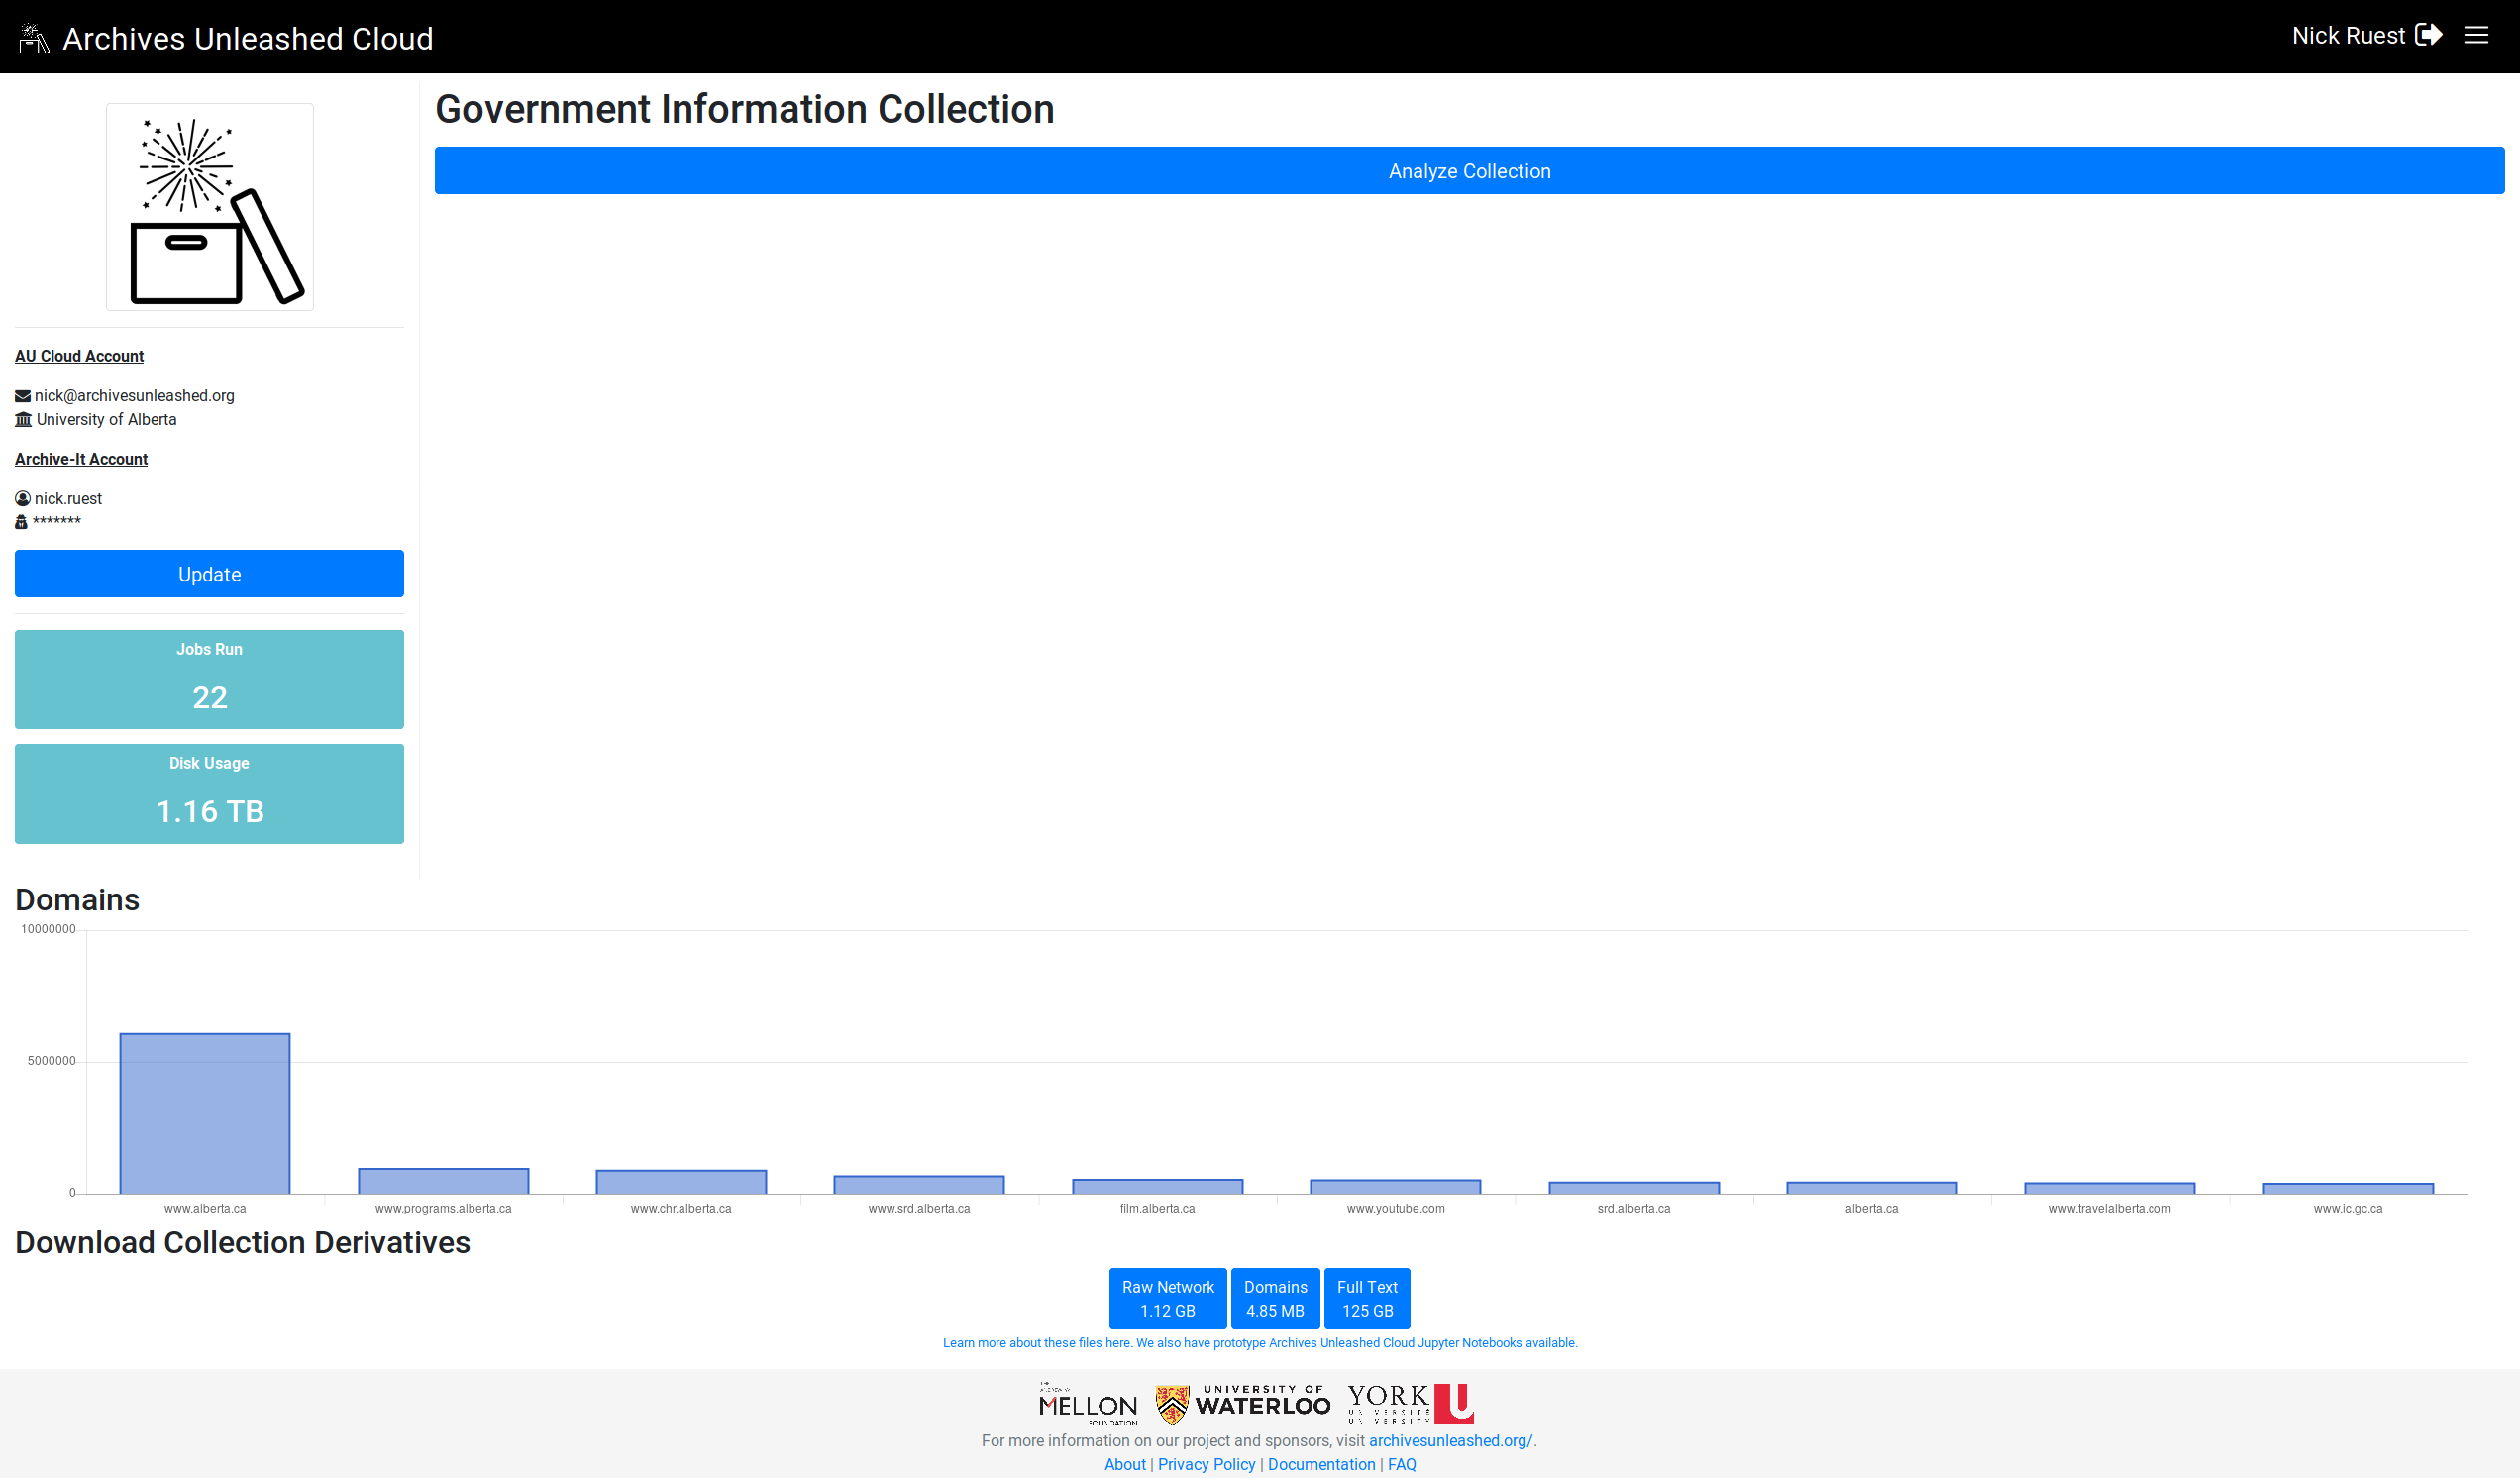 Screenshot_2019-05-02 Government Information Collection Archives Unleashed